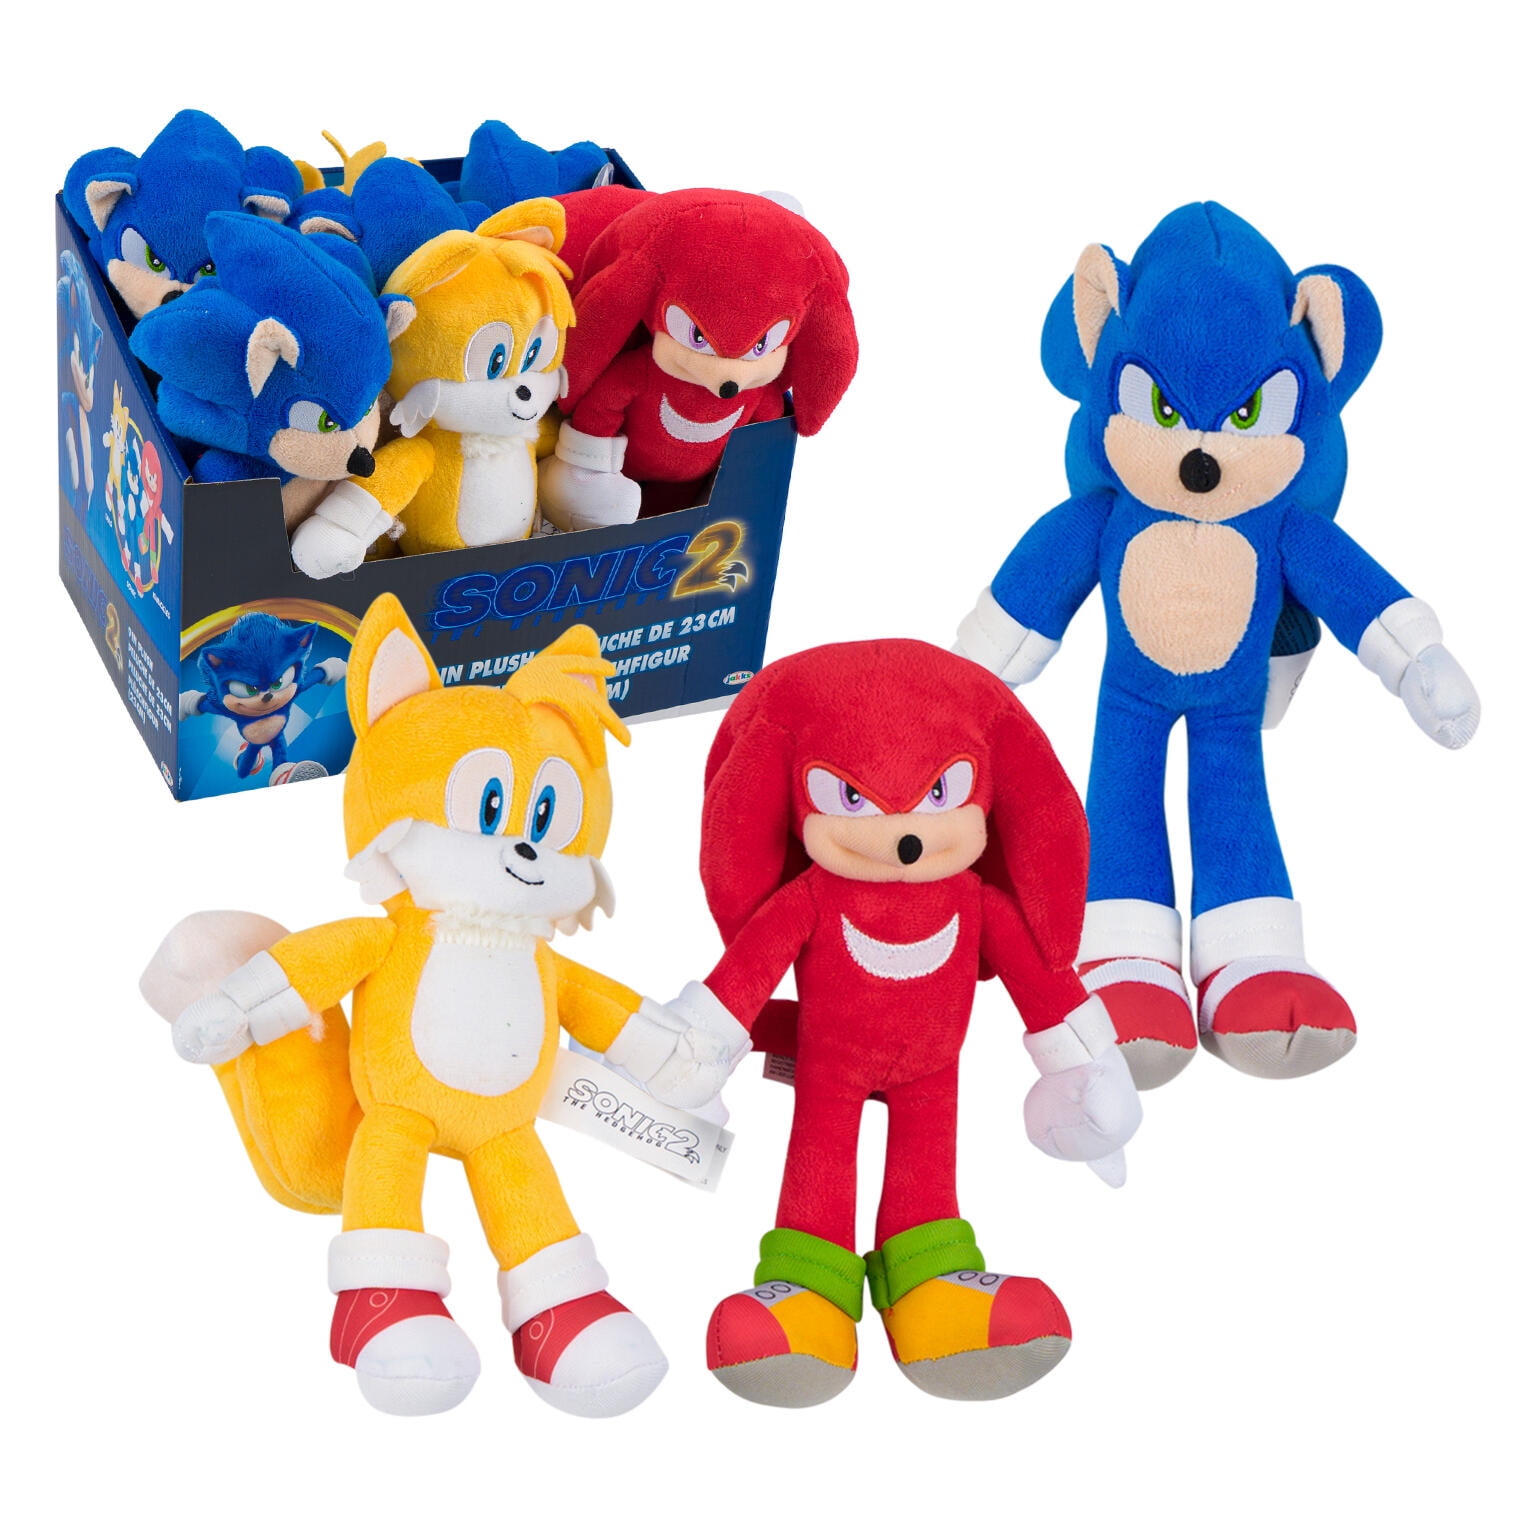 Sonic The Hedgehog Plush Inches Tall Set- Pc Only, 50% OFF